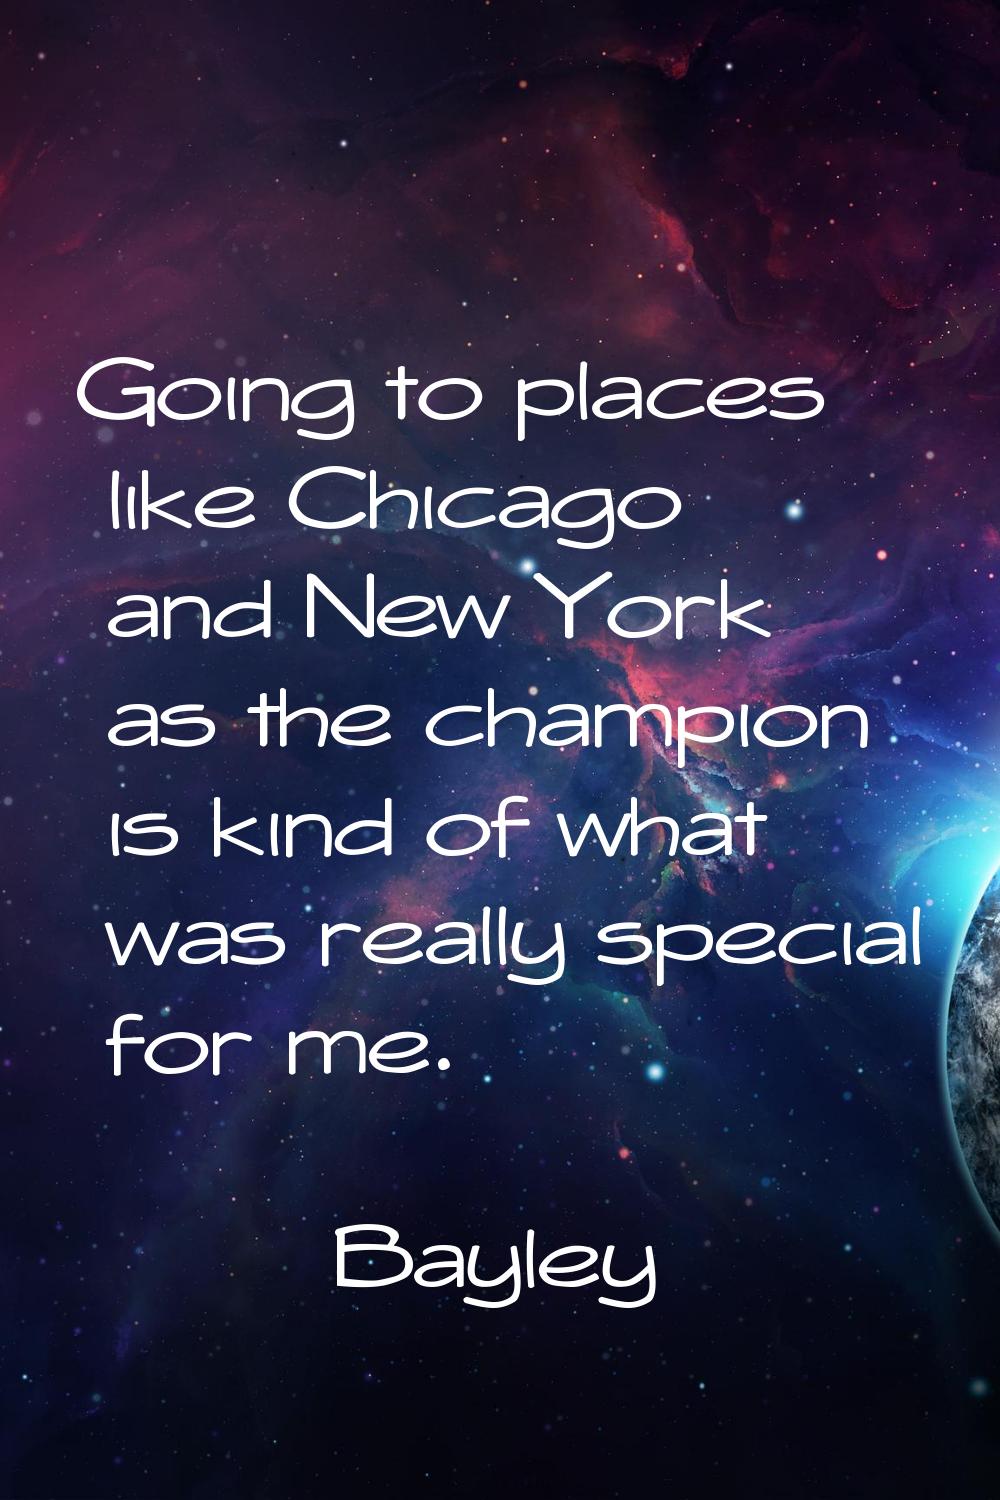 Going to places like Chicago and New York as the champion is kind of what was really special for me